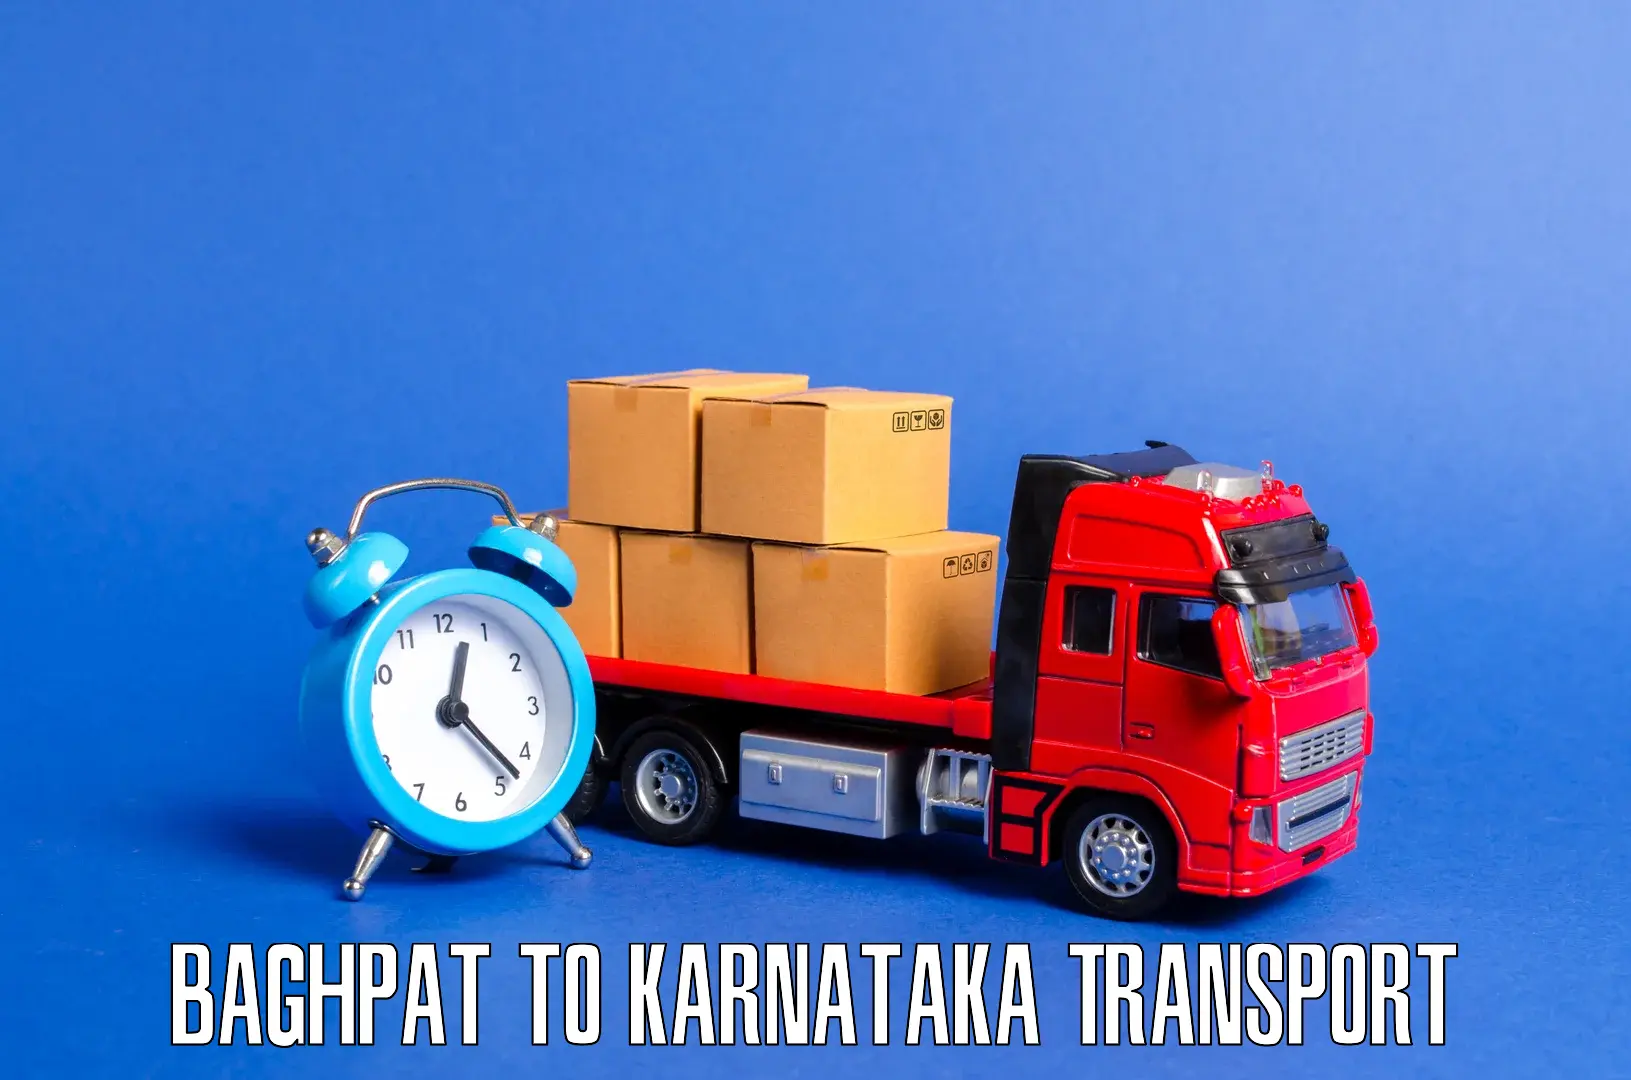 Online transport service Baghpat to Channapatna